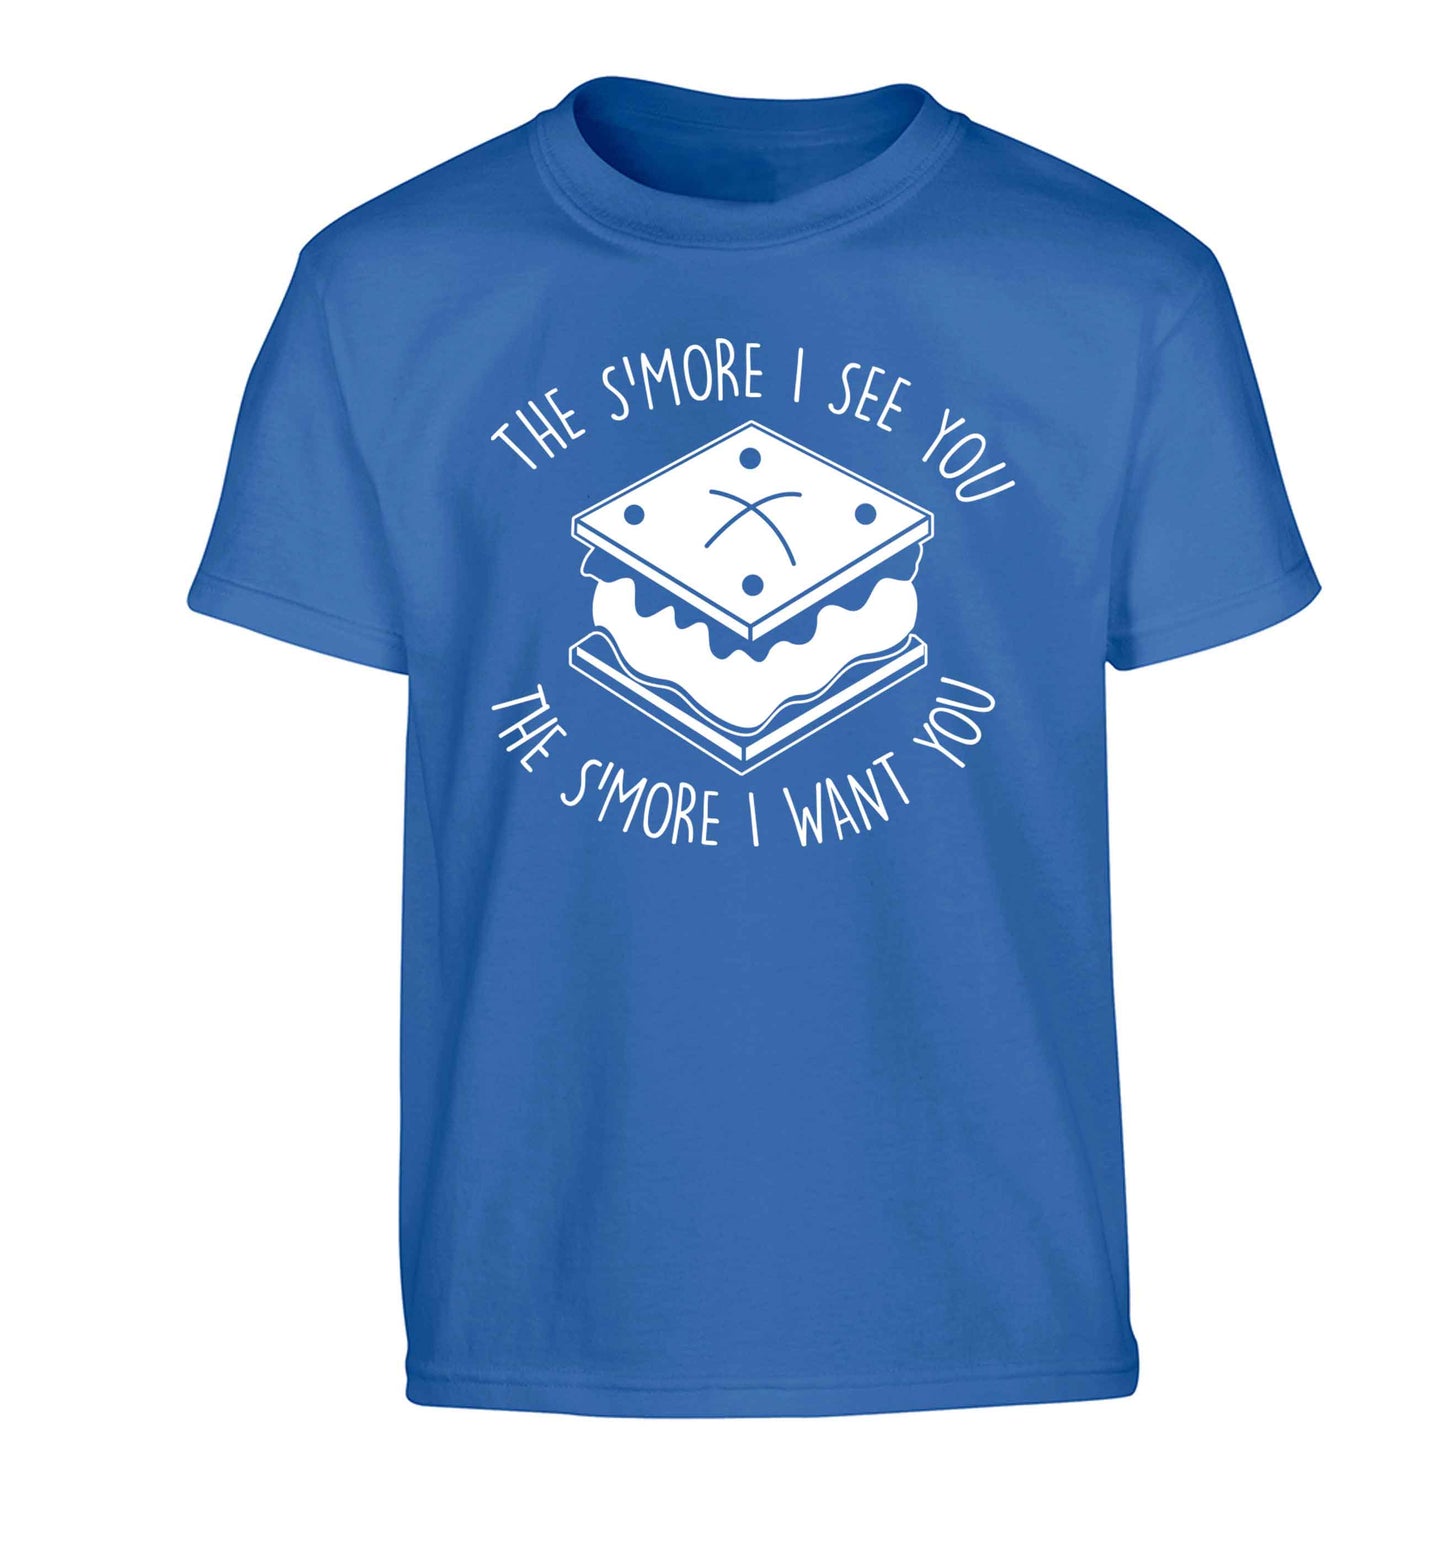 The s'more I see you the s'more I want you Children's blue Tshirt 12-13 Years